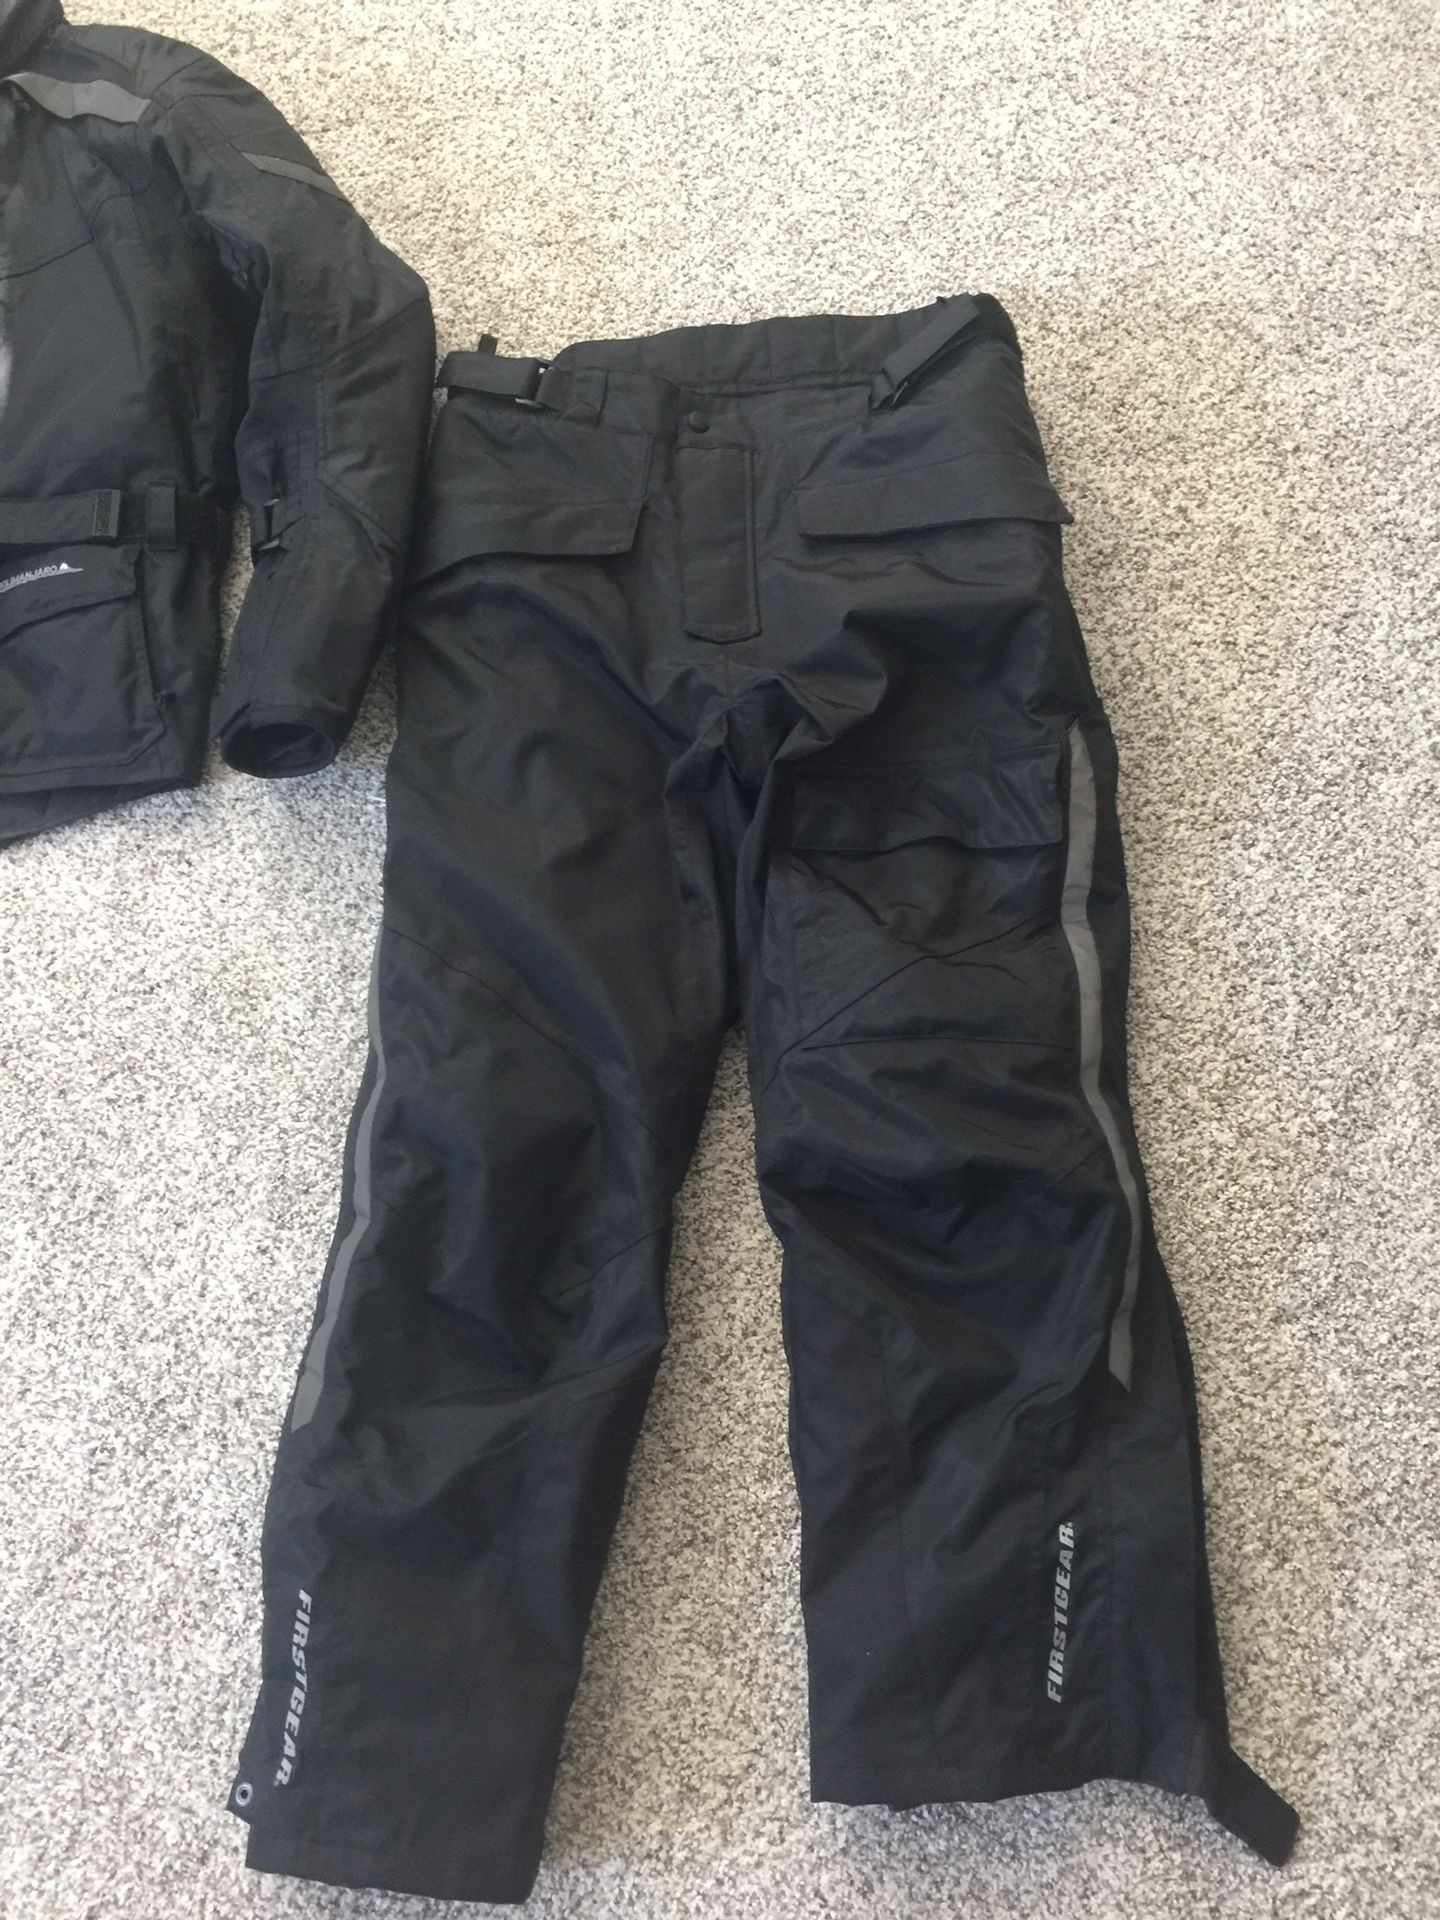 First Gear Motorcycle Riding Suit All Weather